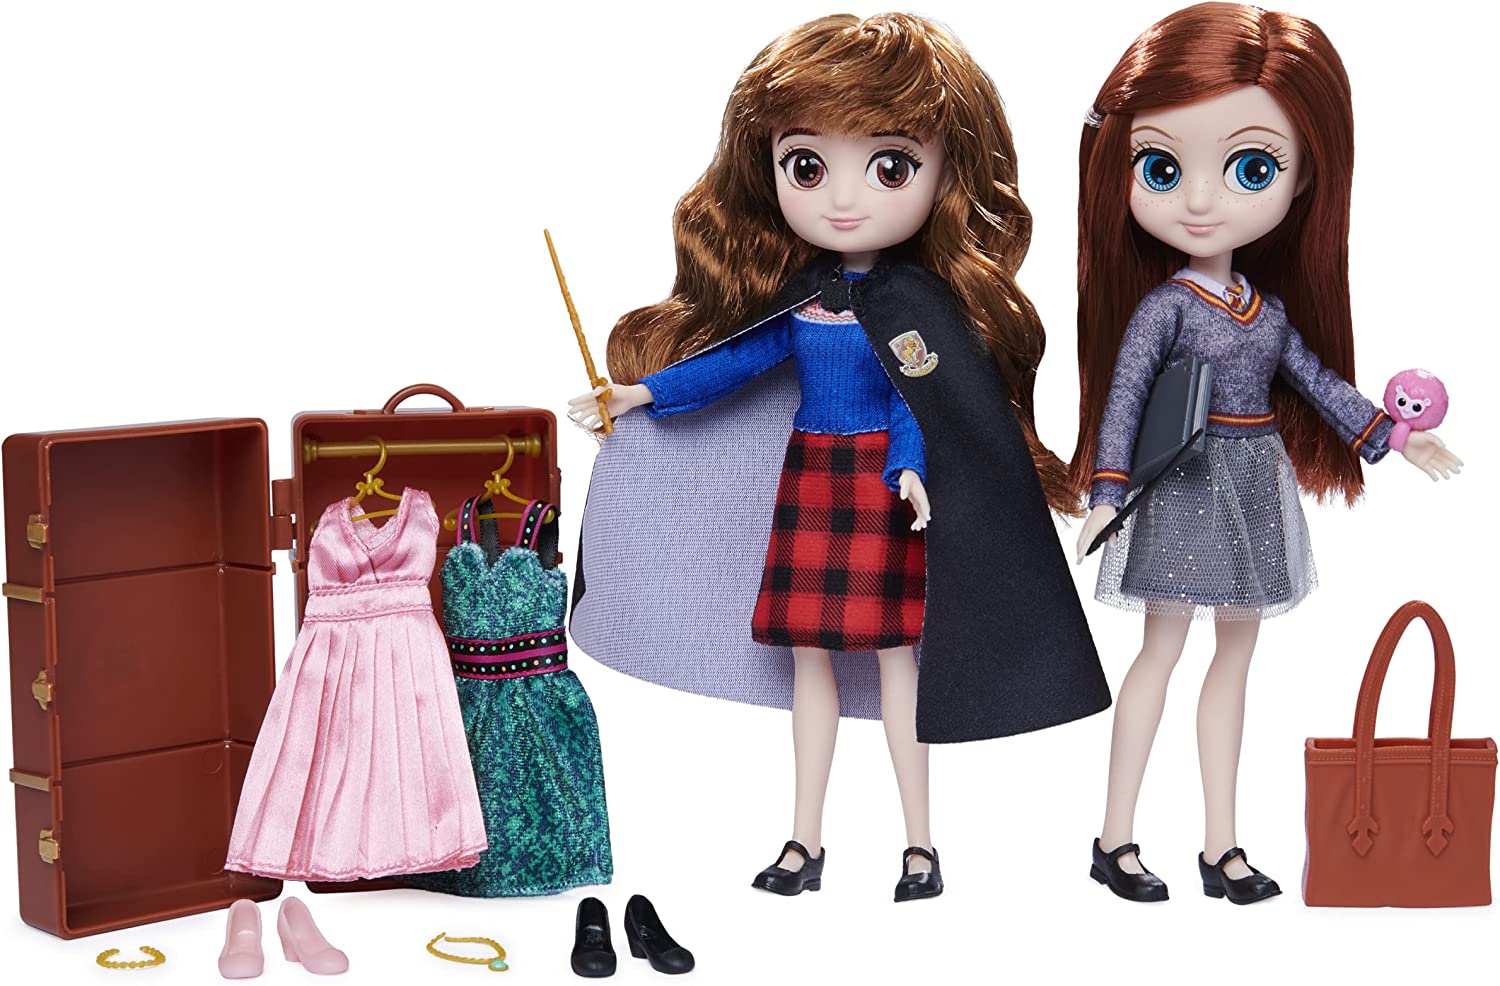 New Harry Potter Wizarding World fashion dolls from Spin Master 